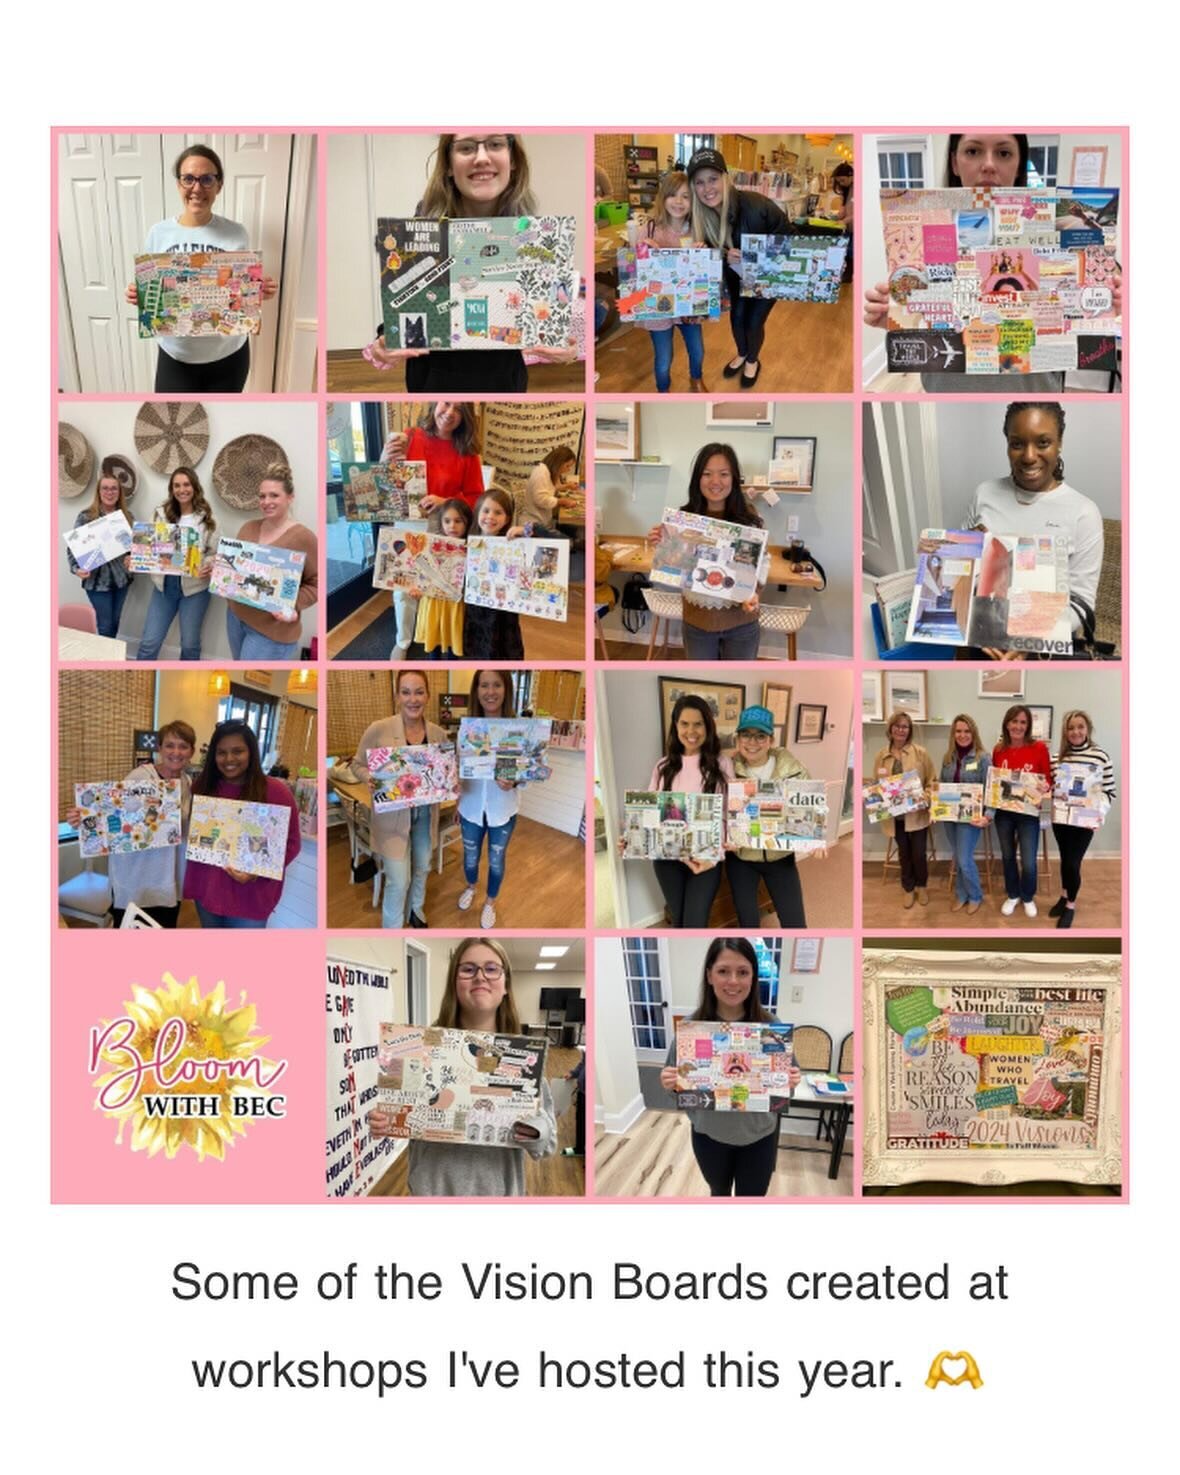 A vision board is a visual representation (&amp; reminder) of your goals and dreams! The life you are working to create for yourself. ✨

If you&rsquo;ve never made one, or need to update yours, I invite you to grab my ✨free✨ vision board workbook! It